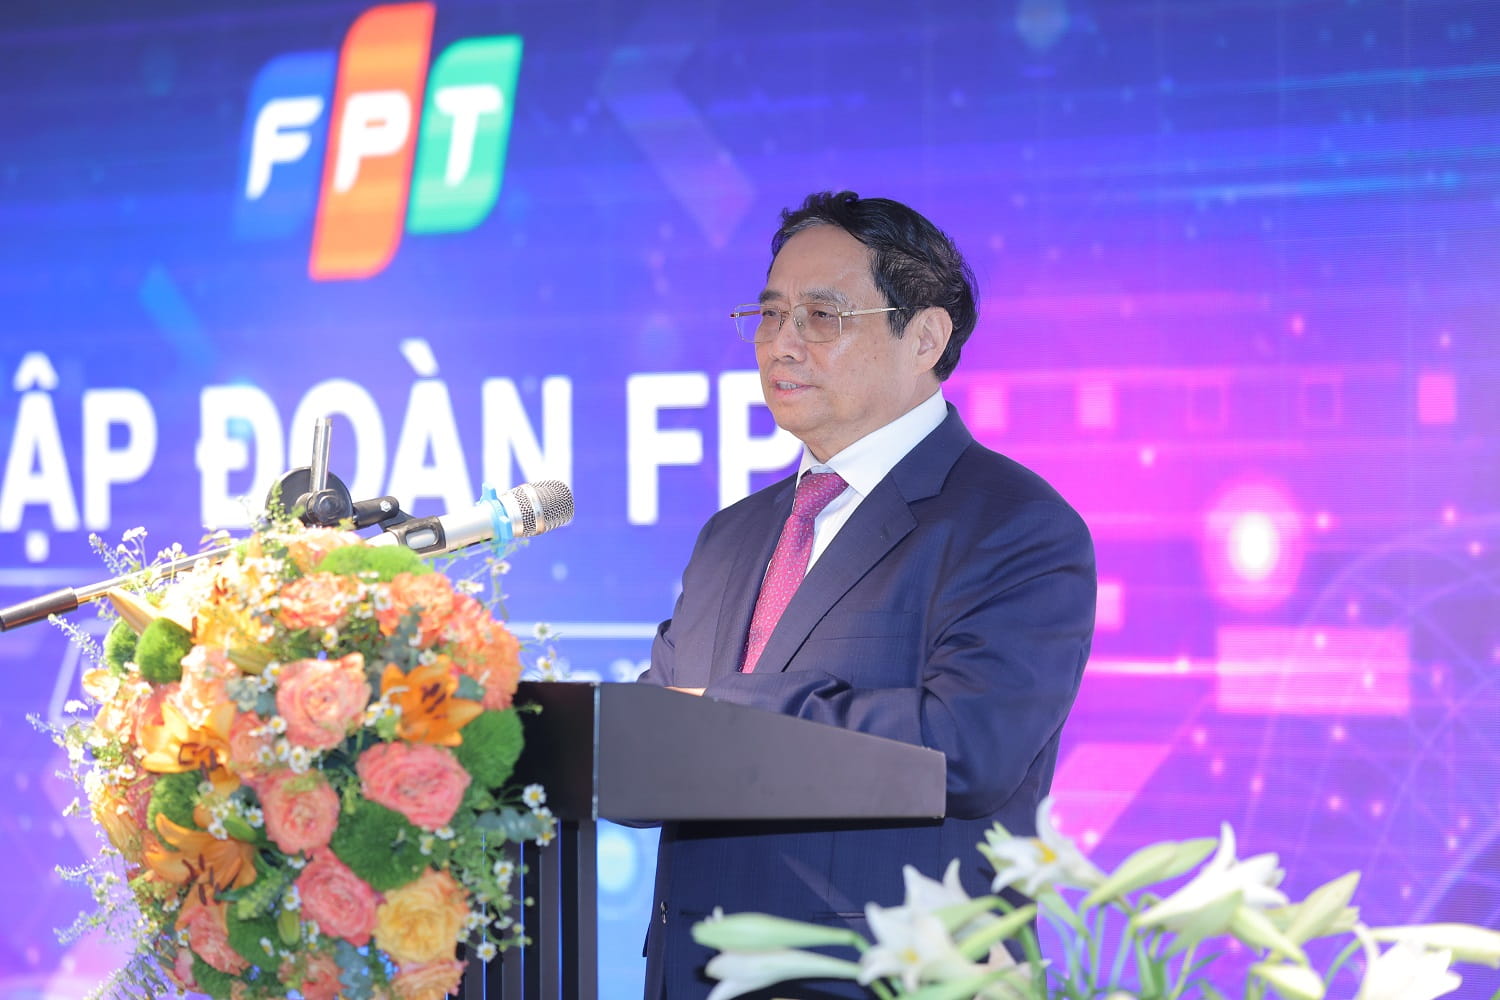 Prime Minister Pham Minh Chinh: FPT has been a pioneer in digital transformation in Vietnam